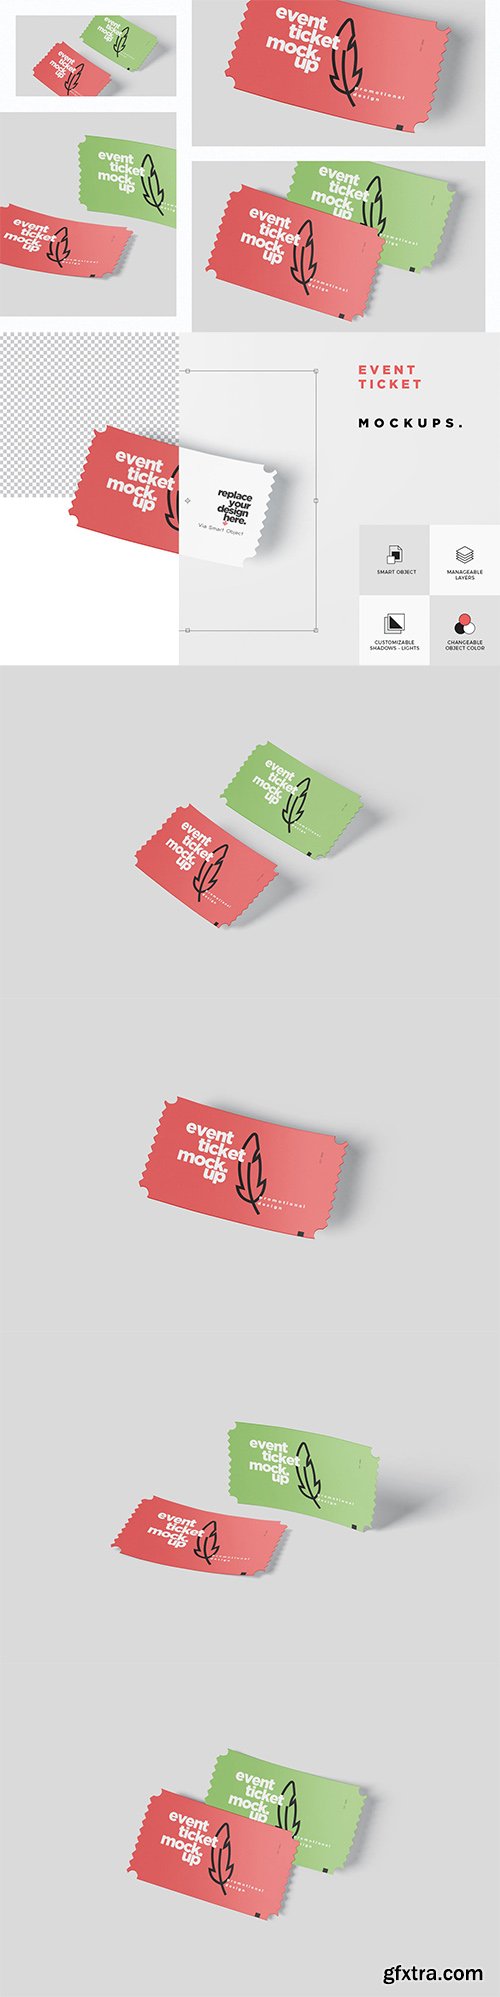 Event Ticket Mockup Set - Small Size